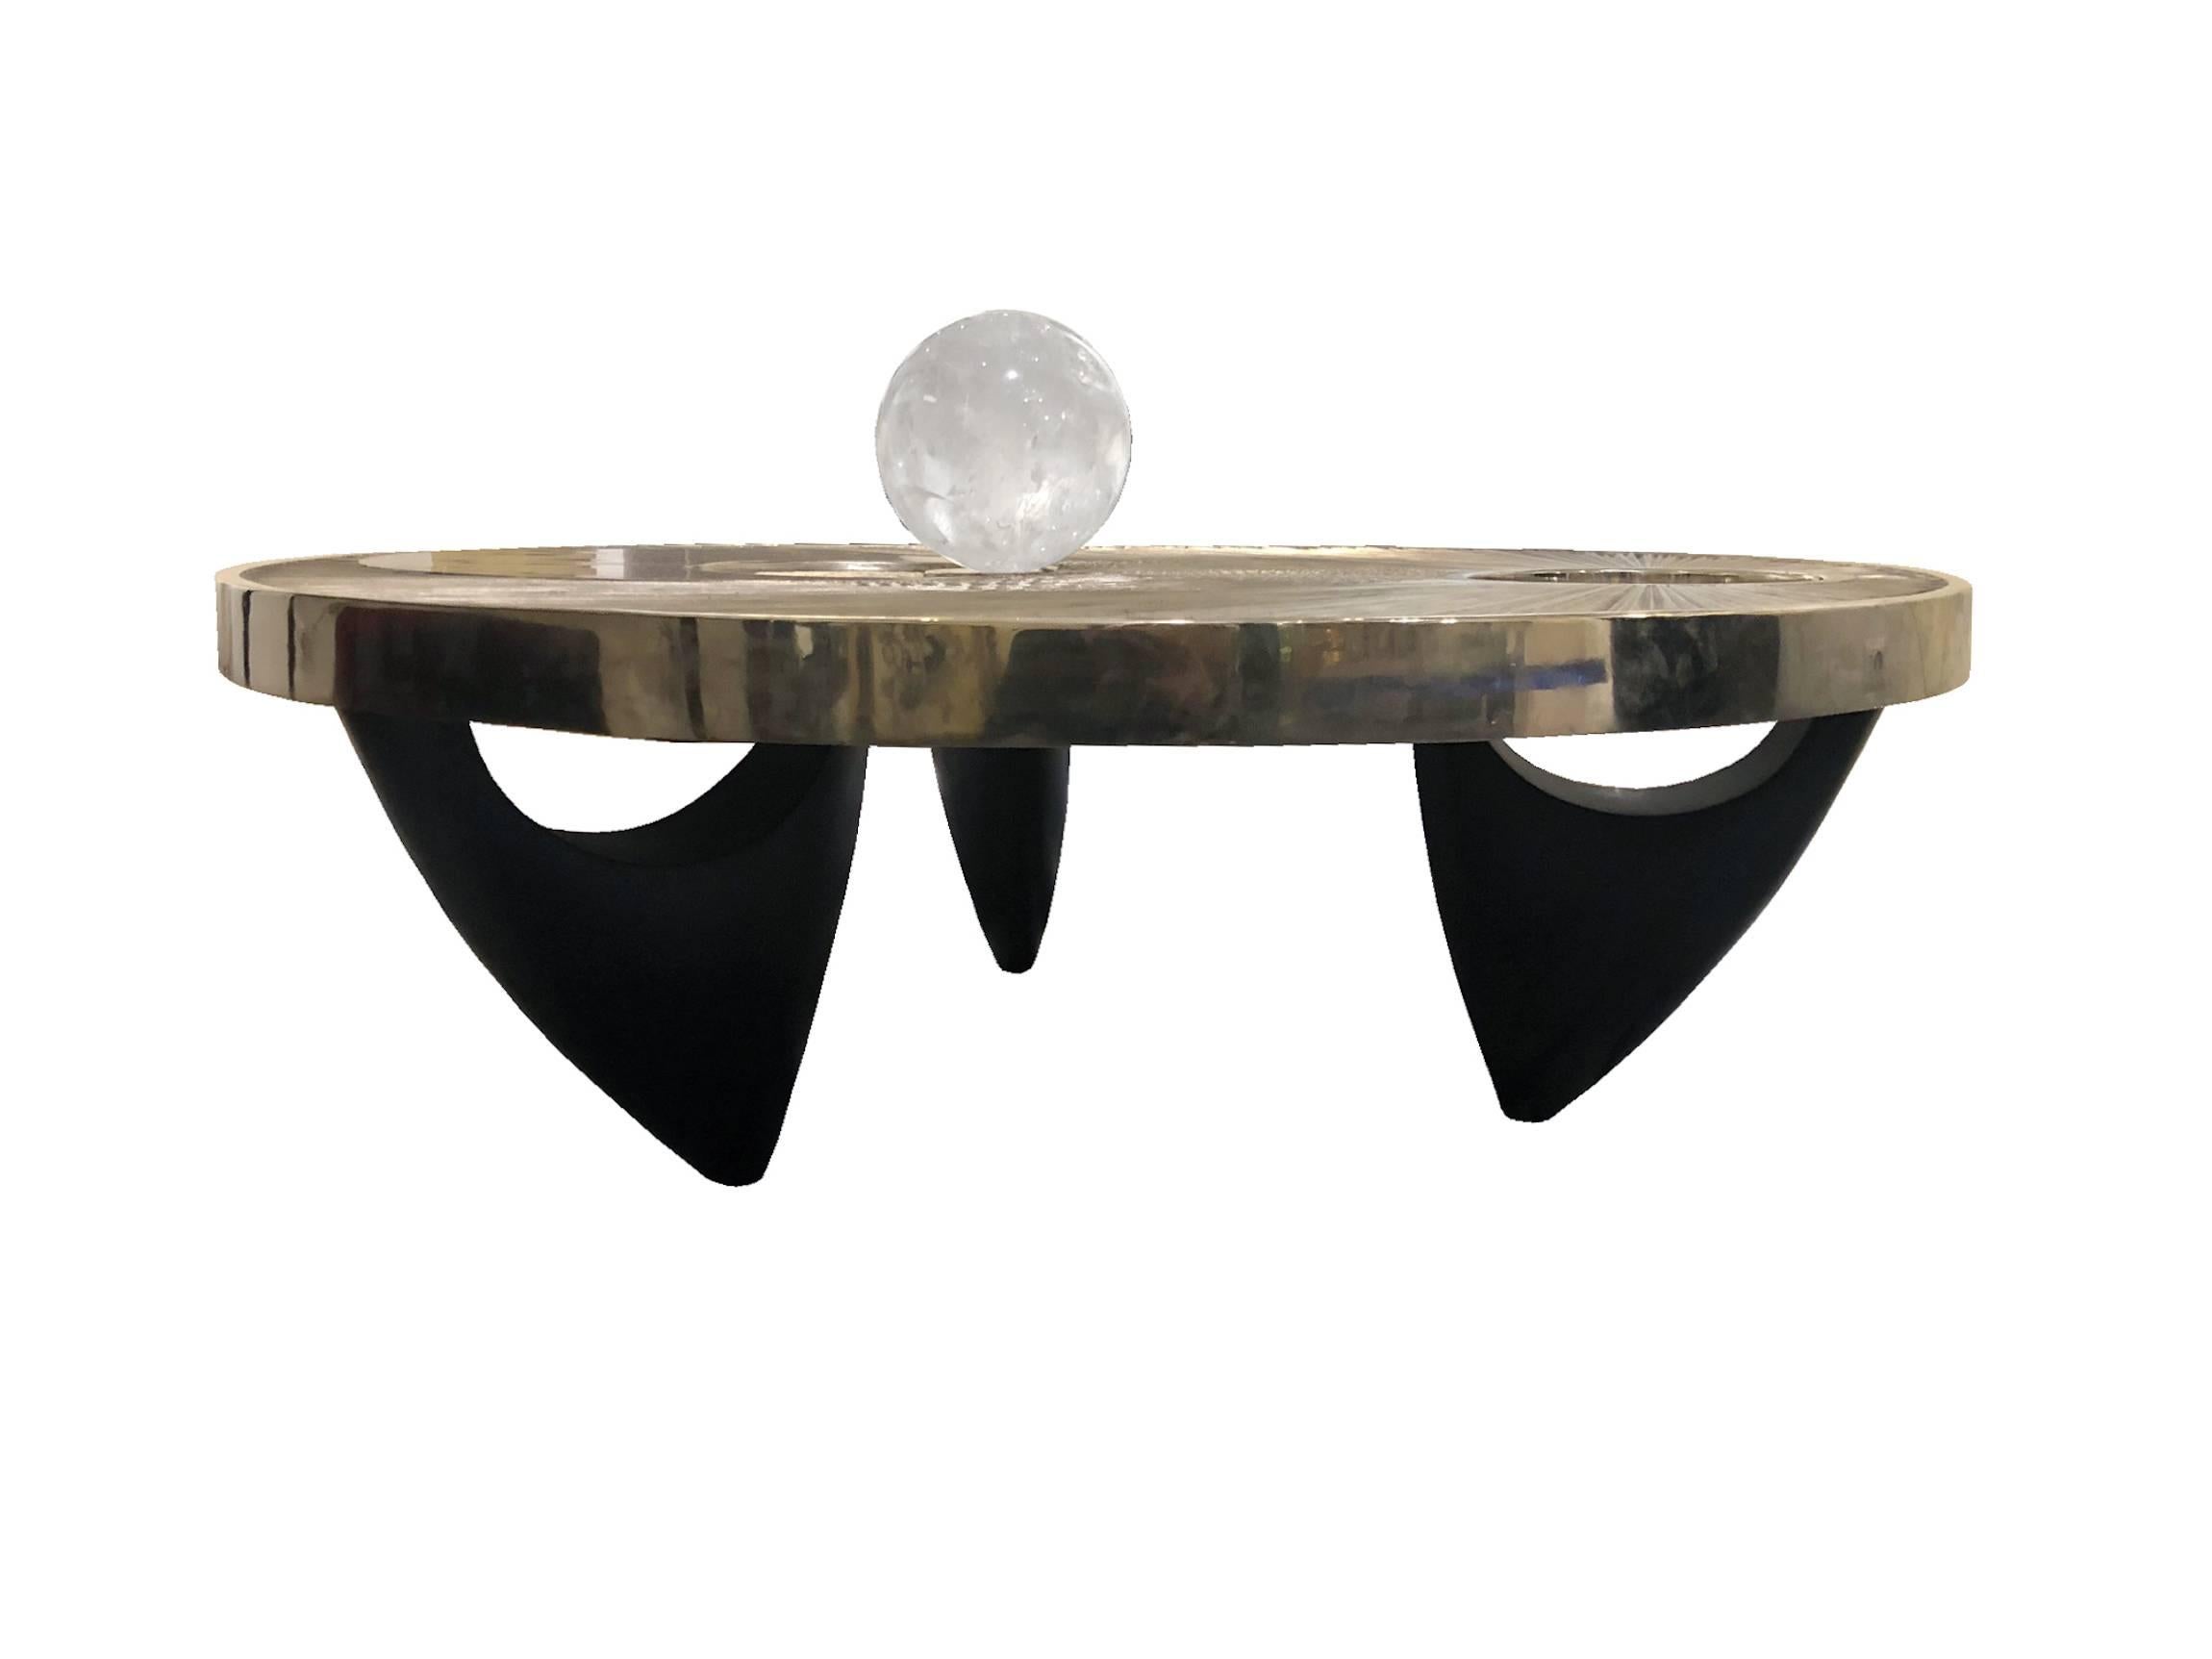 Artistic coffee table in casted white bronze.
The heavy circular top represents the solar eclipse of year 2014, where the sun met the moon, that ideally kiss each other.
With this platonic idea the Italian artist Umberto Cinelli designs and creates